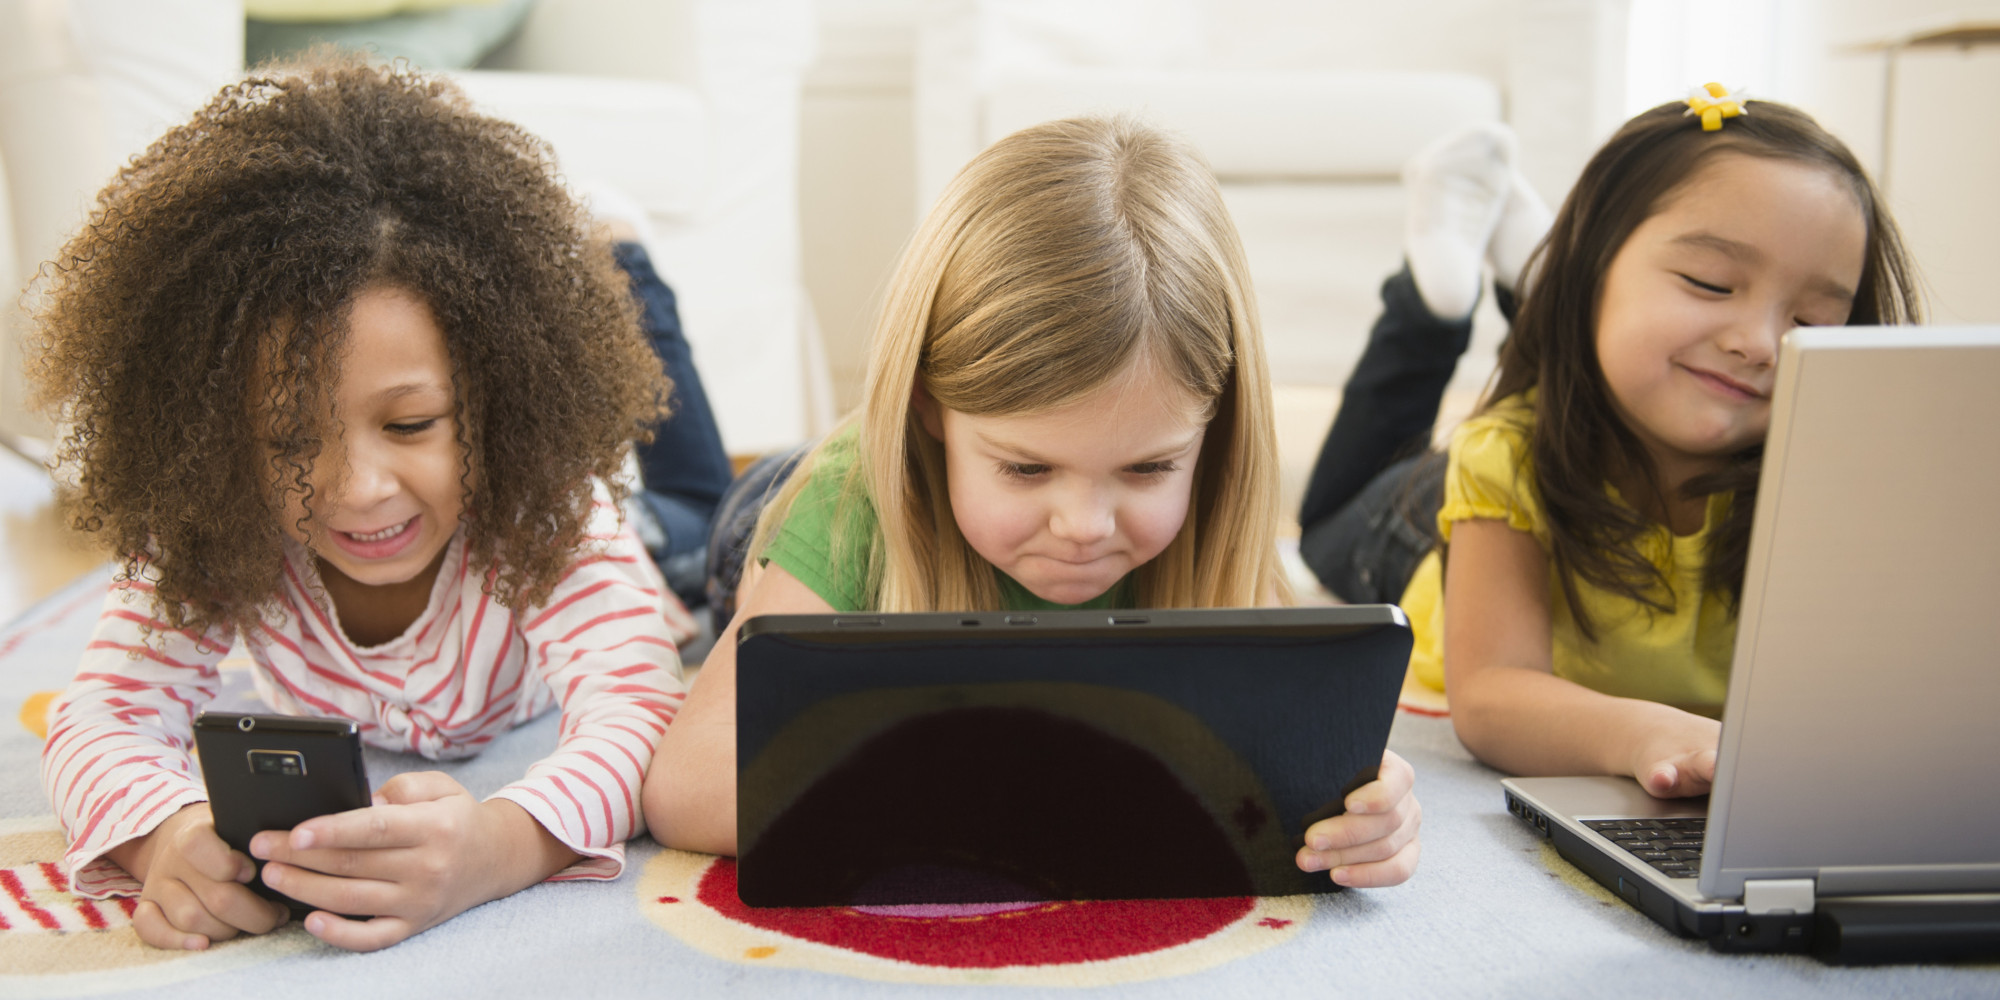 Safer Internet Day: How Parents Can Advise Kids To Stay Safe On Social